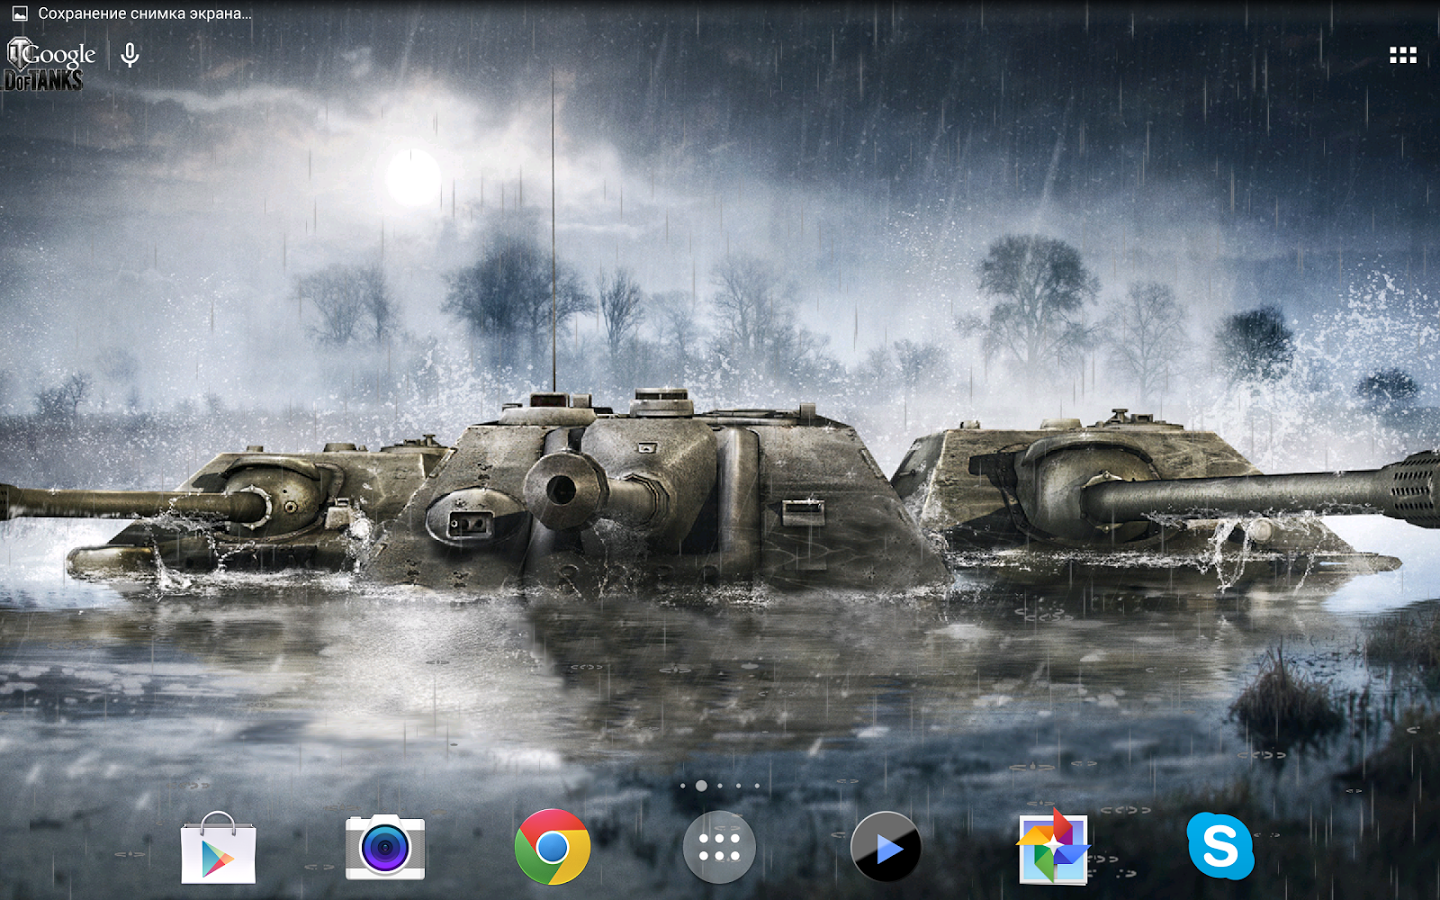 live wallpaper created specially for world of tanks live wallpaper